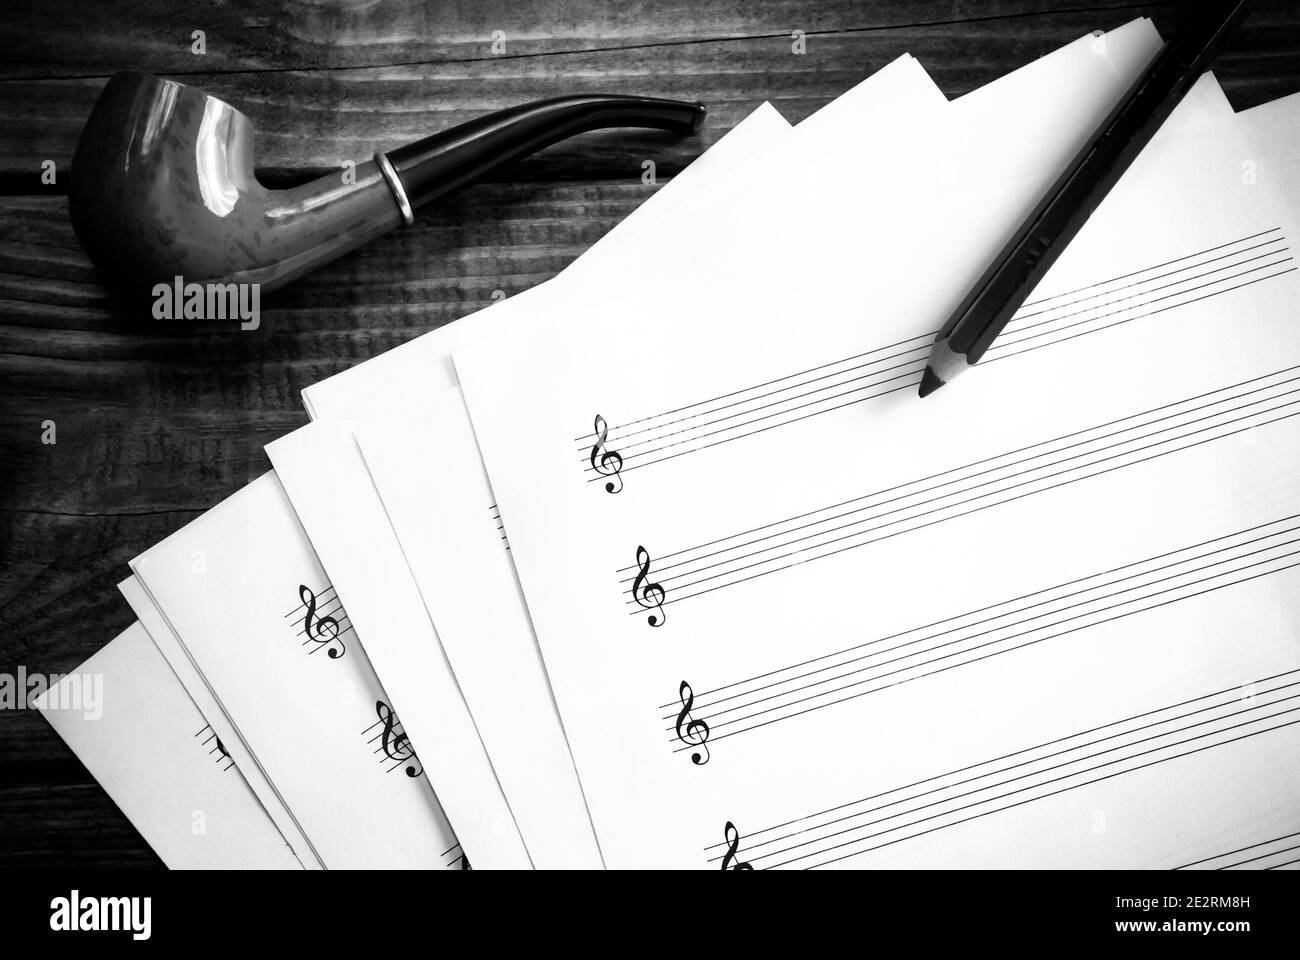 Blank music score paper and a smoking pipe in black and white. Stock Photo